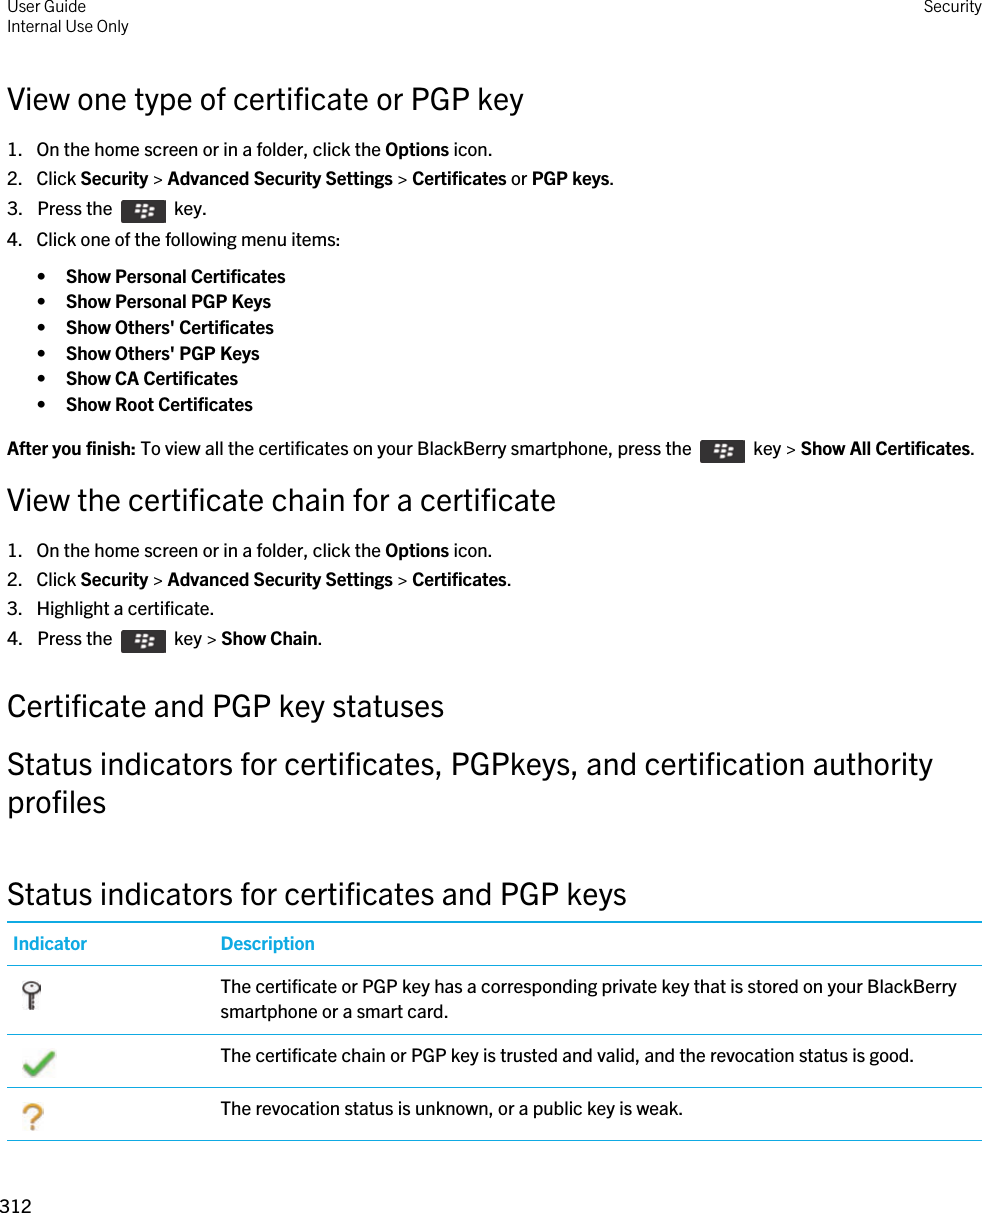 View one type of certificate or PGP key1. On the home screen or in a folder, click the Options icon.2. Click Security &gt; Advanced Security Settings &gt; Certificates or PGP keys.3.  Press the    key. 4. Click one of the following menu items:•Show Personal Certificates•Show Personal PGP Keys•Show Others&apos; Certificates•Show Others&apos; PGP Keys•Show CA Certificates•Show Root CertificatesAfter you finish: To view all the certificates on your BlackBerry smartphone, press the    key &gt; Show All Certificates.View the certificate chain for a certificate1. On the home screen or in a folder, click the Options icon.2. Click Security &gt; Advanced Security Settings &gt; Certificates.3. Highlight a certificate.4.  Press the    key &gt; Show Chain. Certificate and PGP key statusesStatus indicators for certificates, PGPkeys, and certification authority profilesStatus indicators for certificates and PGP keysIndicator Description The certificate or PGP key has a corresponding private key that is stored on your BlackBerry smartphone or a smart card. The certificate chain or PGP key is trusted and valid, and the revocation status is good. The revocation status is unknown, or a public key is weak.User GuideInternal Use Only Security312 